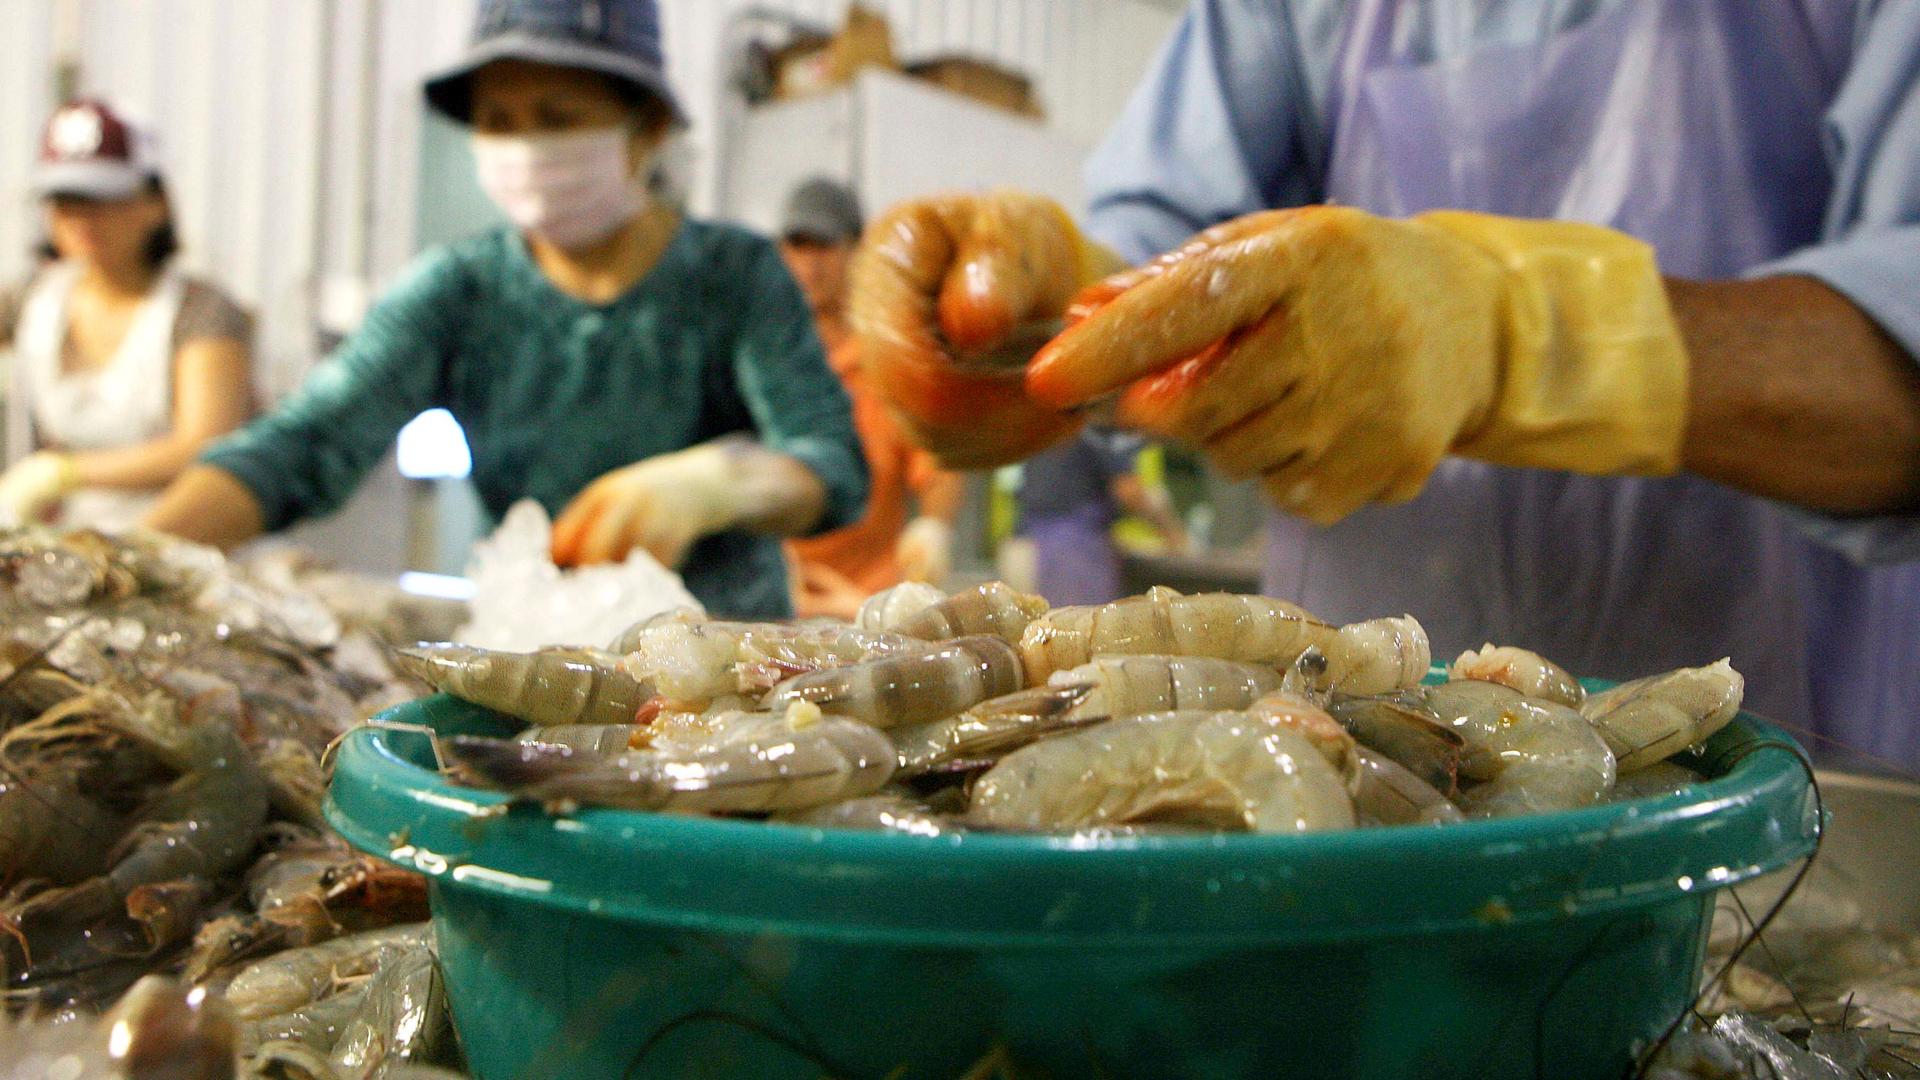 Employees dehead Louisiana white shrimp at C.F. Gollott & Son Seafood in D'Iberville, Mississippi, June 3, 2010.